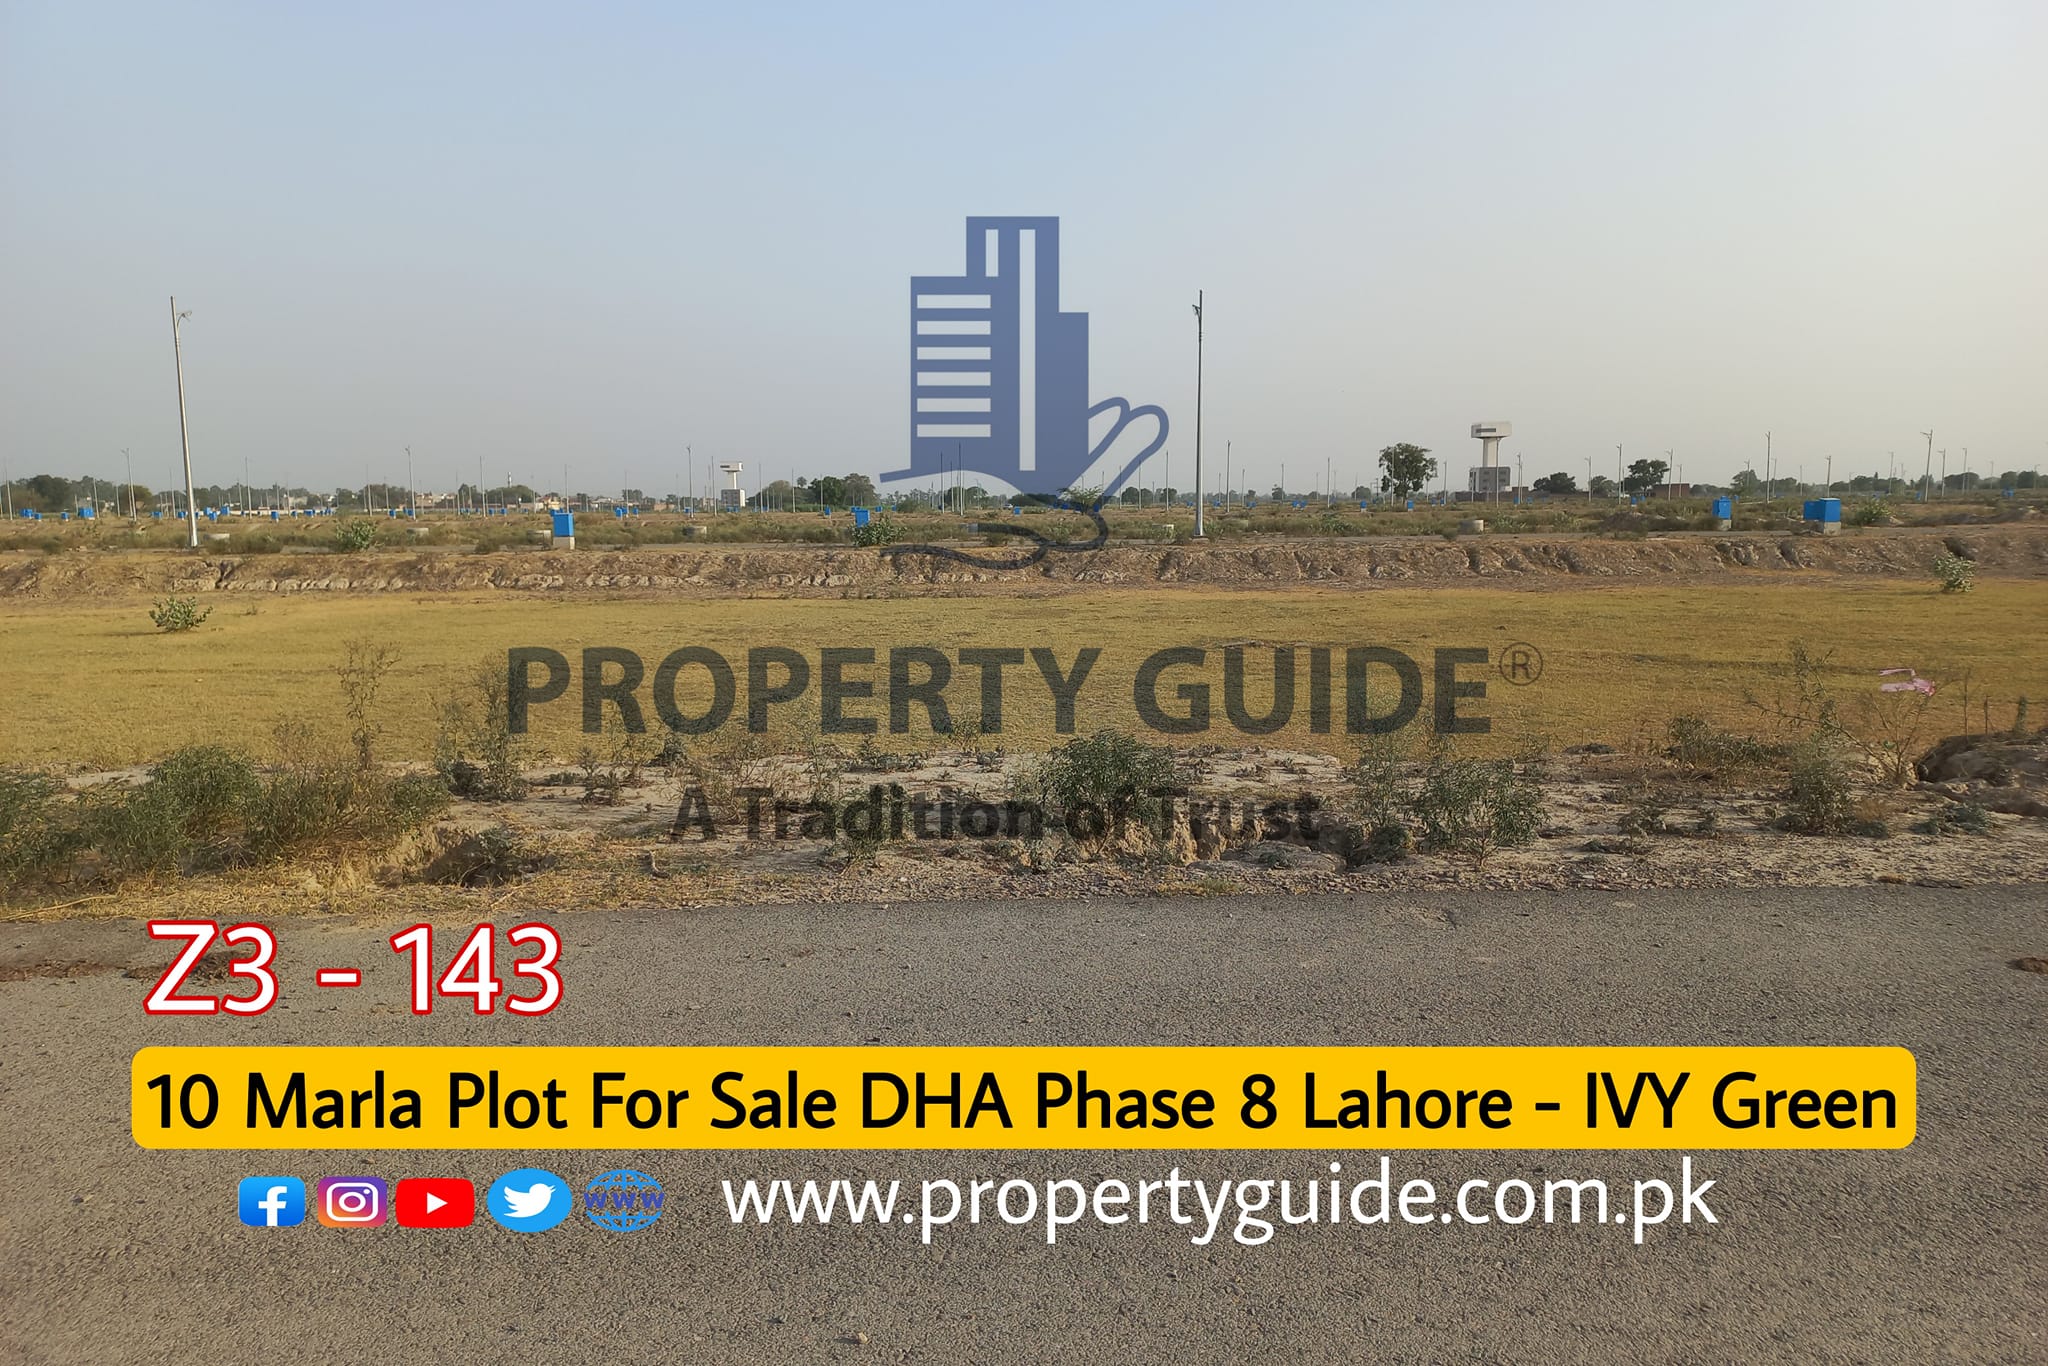 DHA Phase 8 IVY Green Plot For Sale